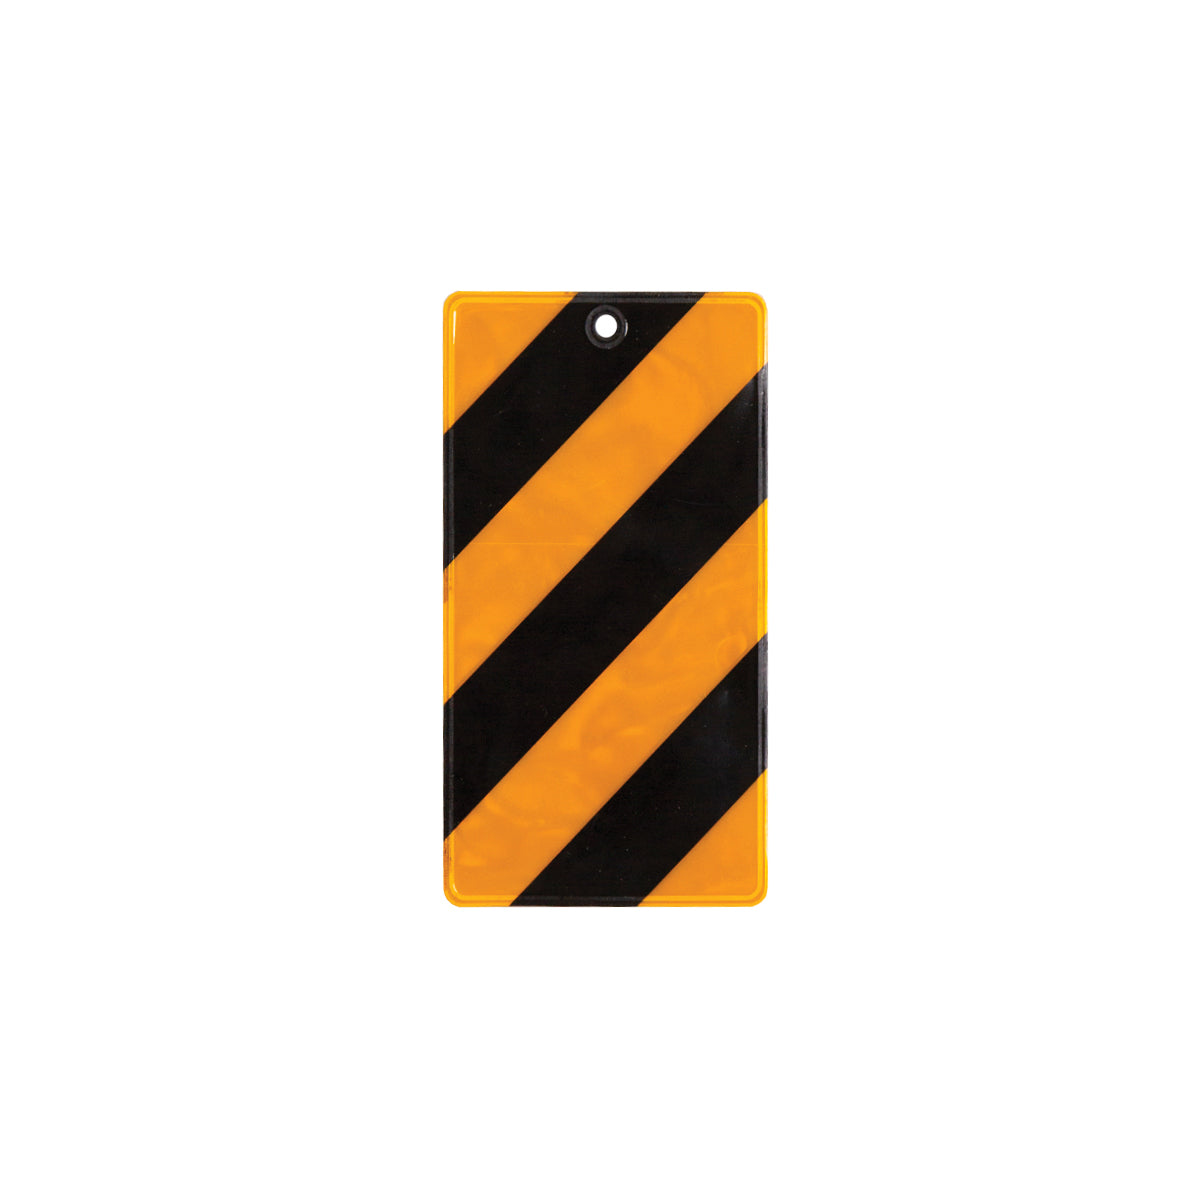 Reflective Tag - 160mm x 90mm